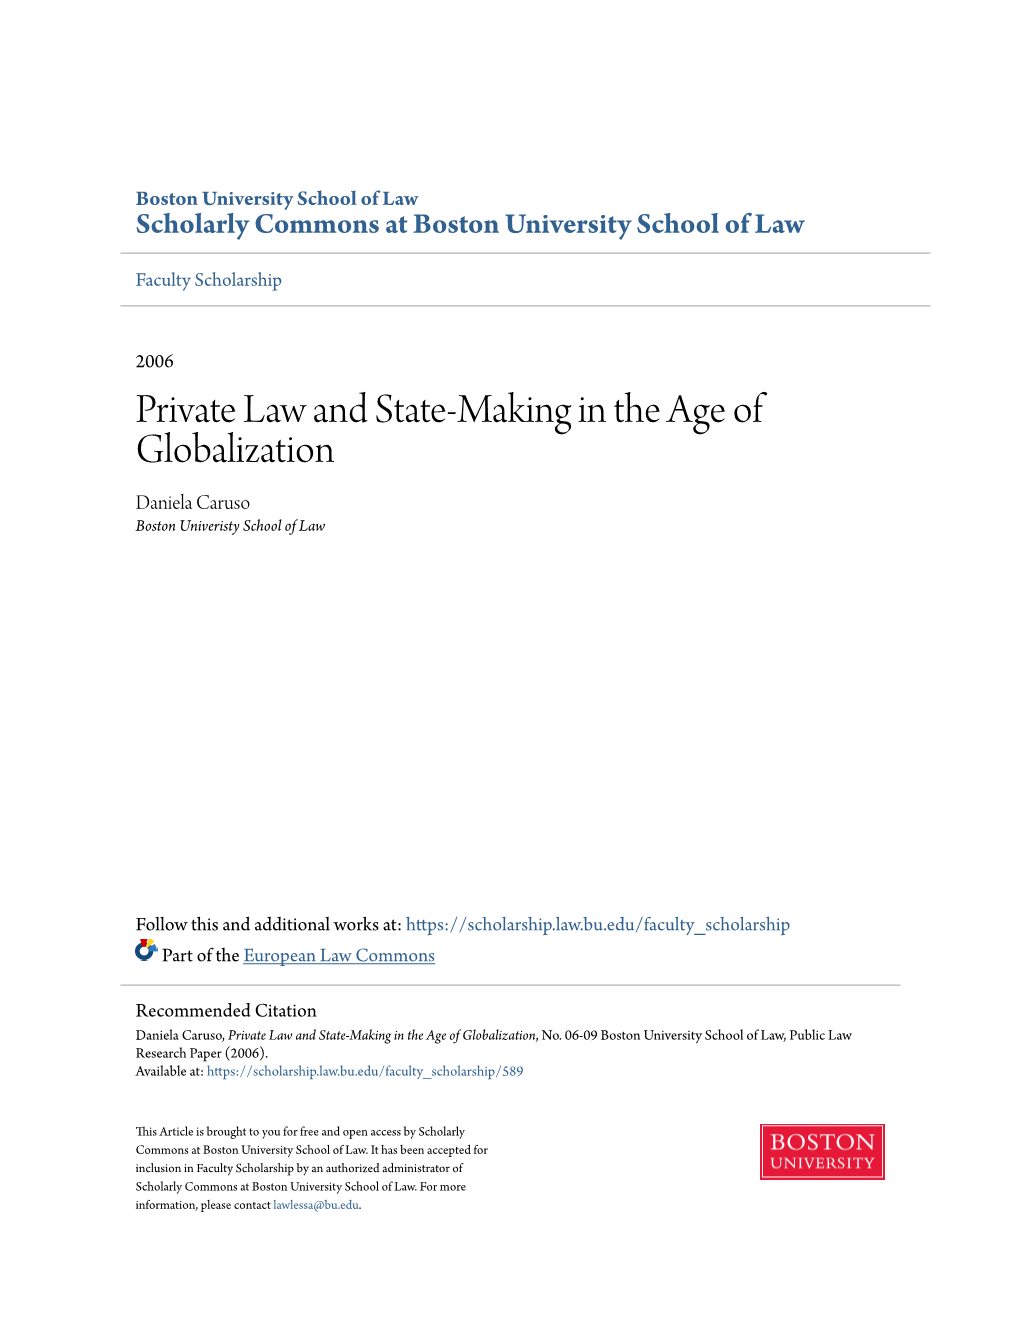 Private Law and State-Making in the Age of Globalization Daniela Caruso Boston Univeristy School of Law